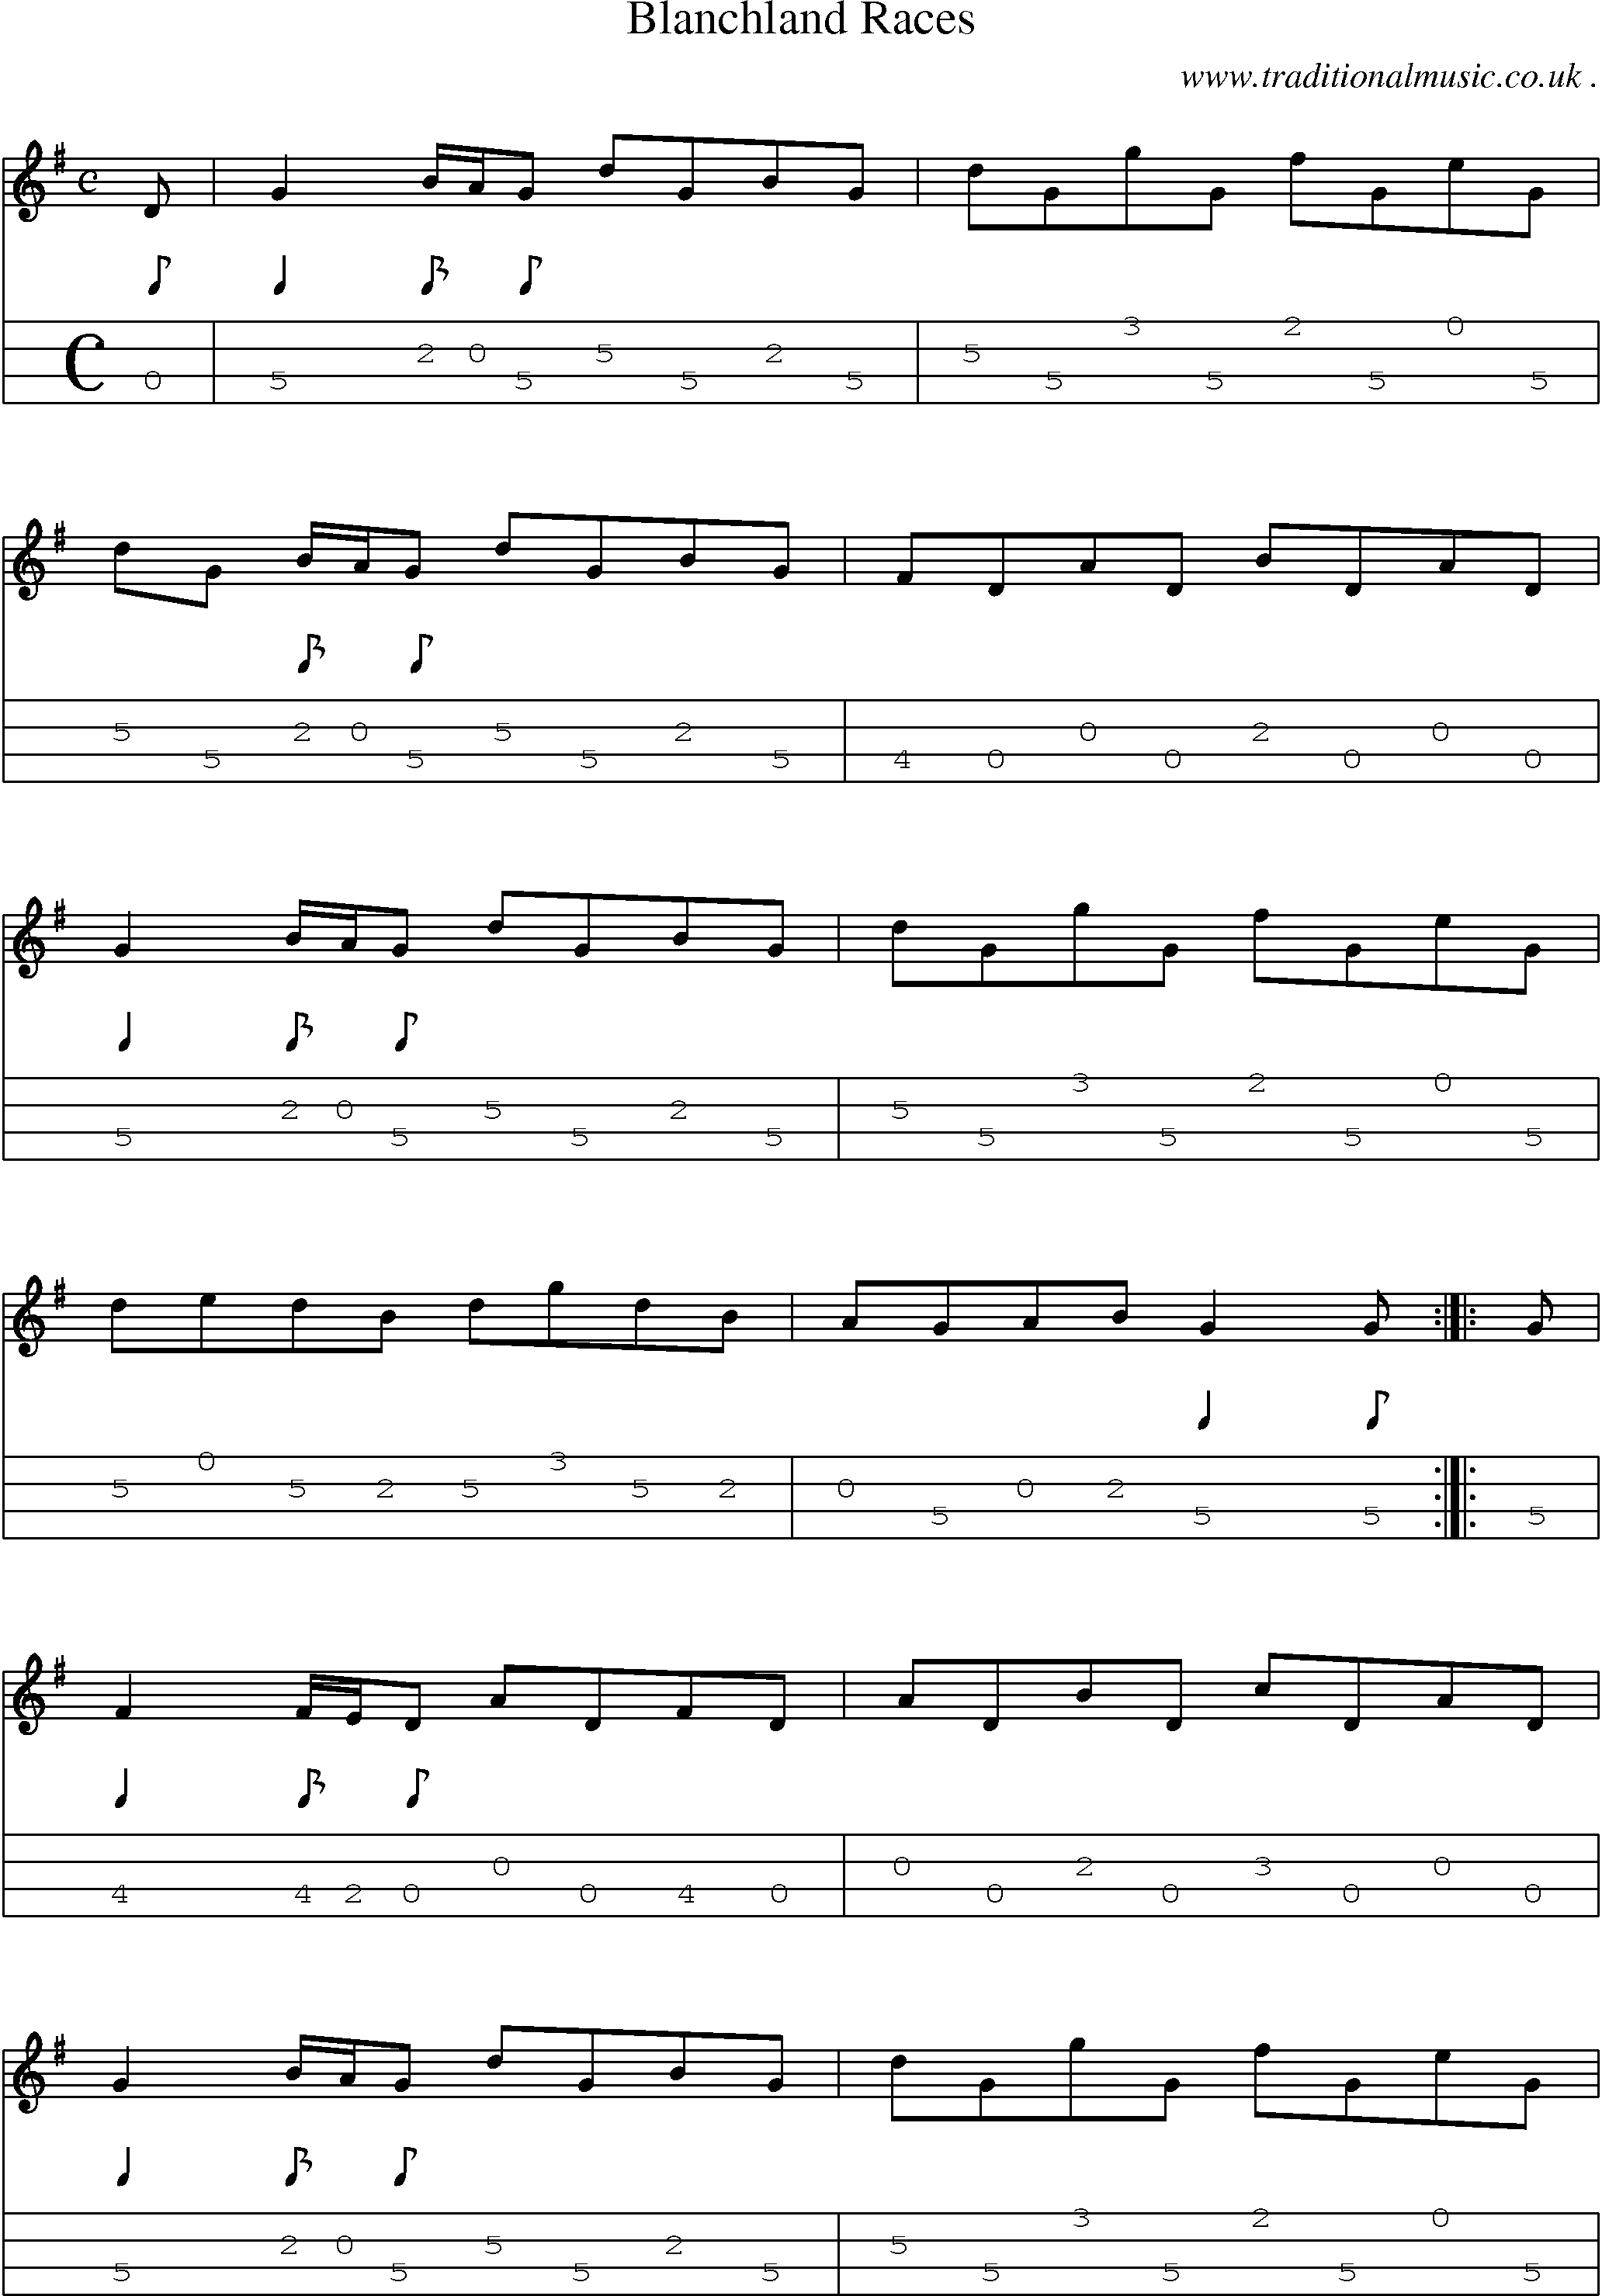 Sheet-Music and Mandolin Tabs for Blanchland Races 